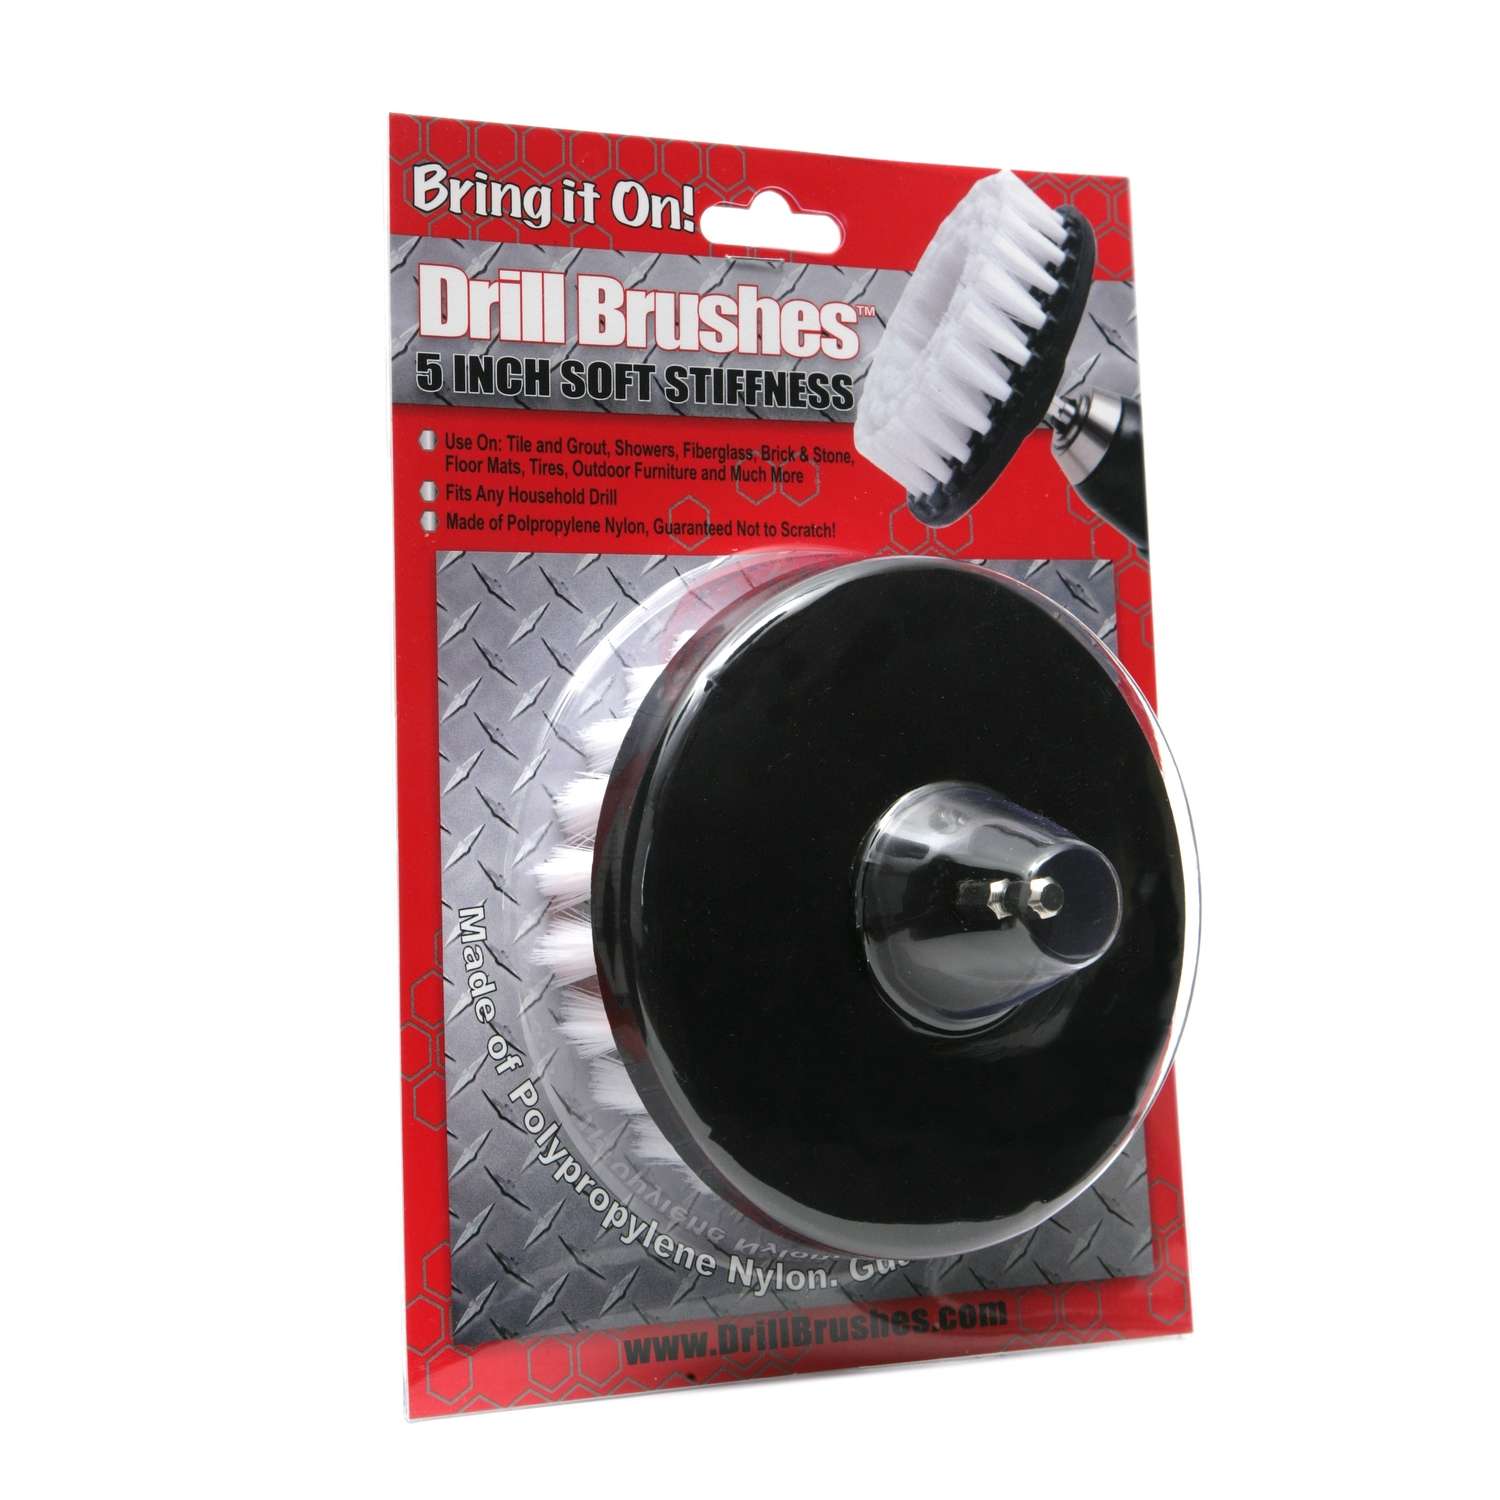 Drillbrush Bbq Grill Cleaning Ultra Stiff Drill Powered Cleaning Brushes 4  pc. Kit Replaces Wire Brushes for Rust Removal at Tractor Supply Co.